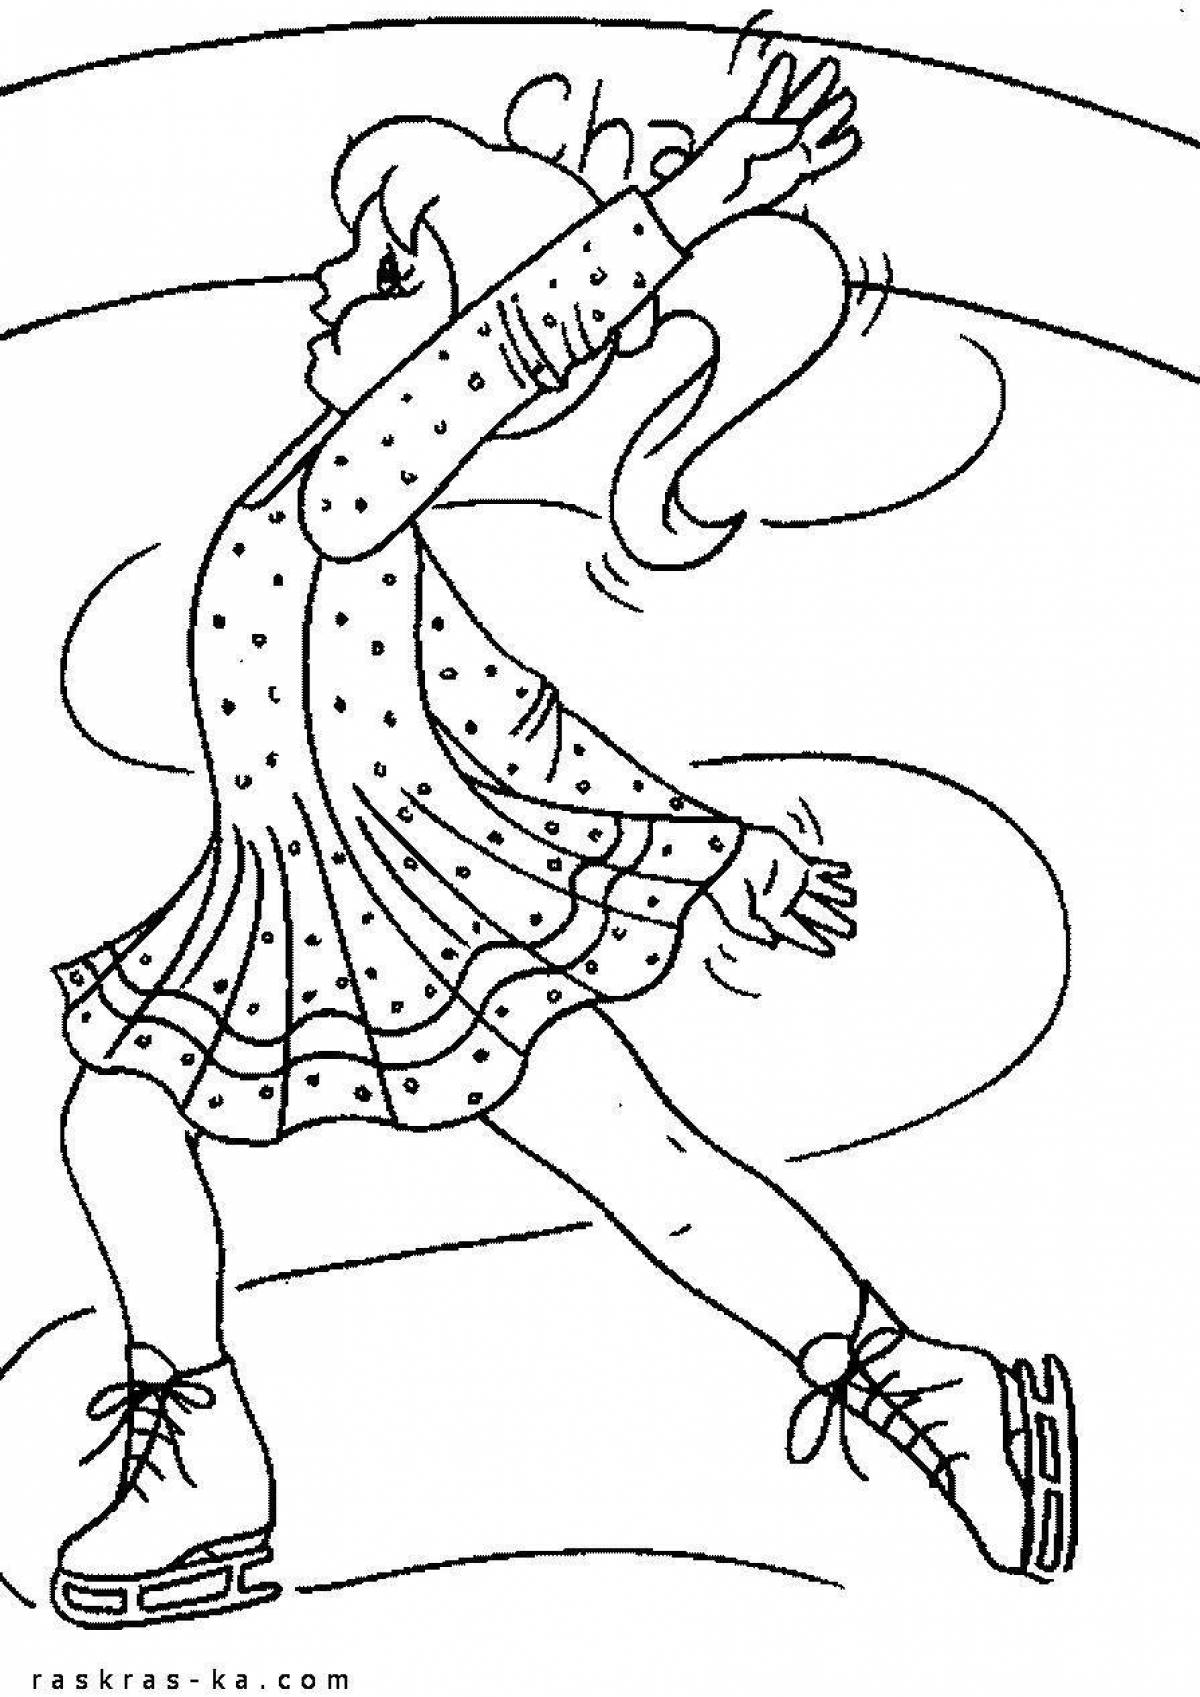 Adorable figure skating coloring book for kids